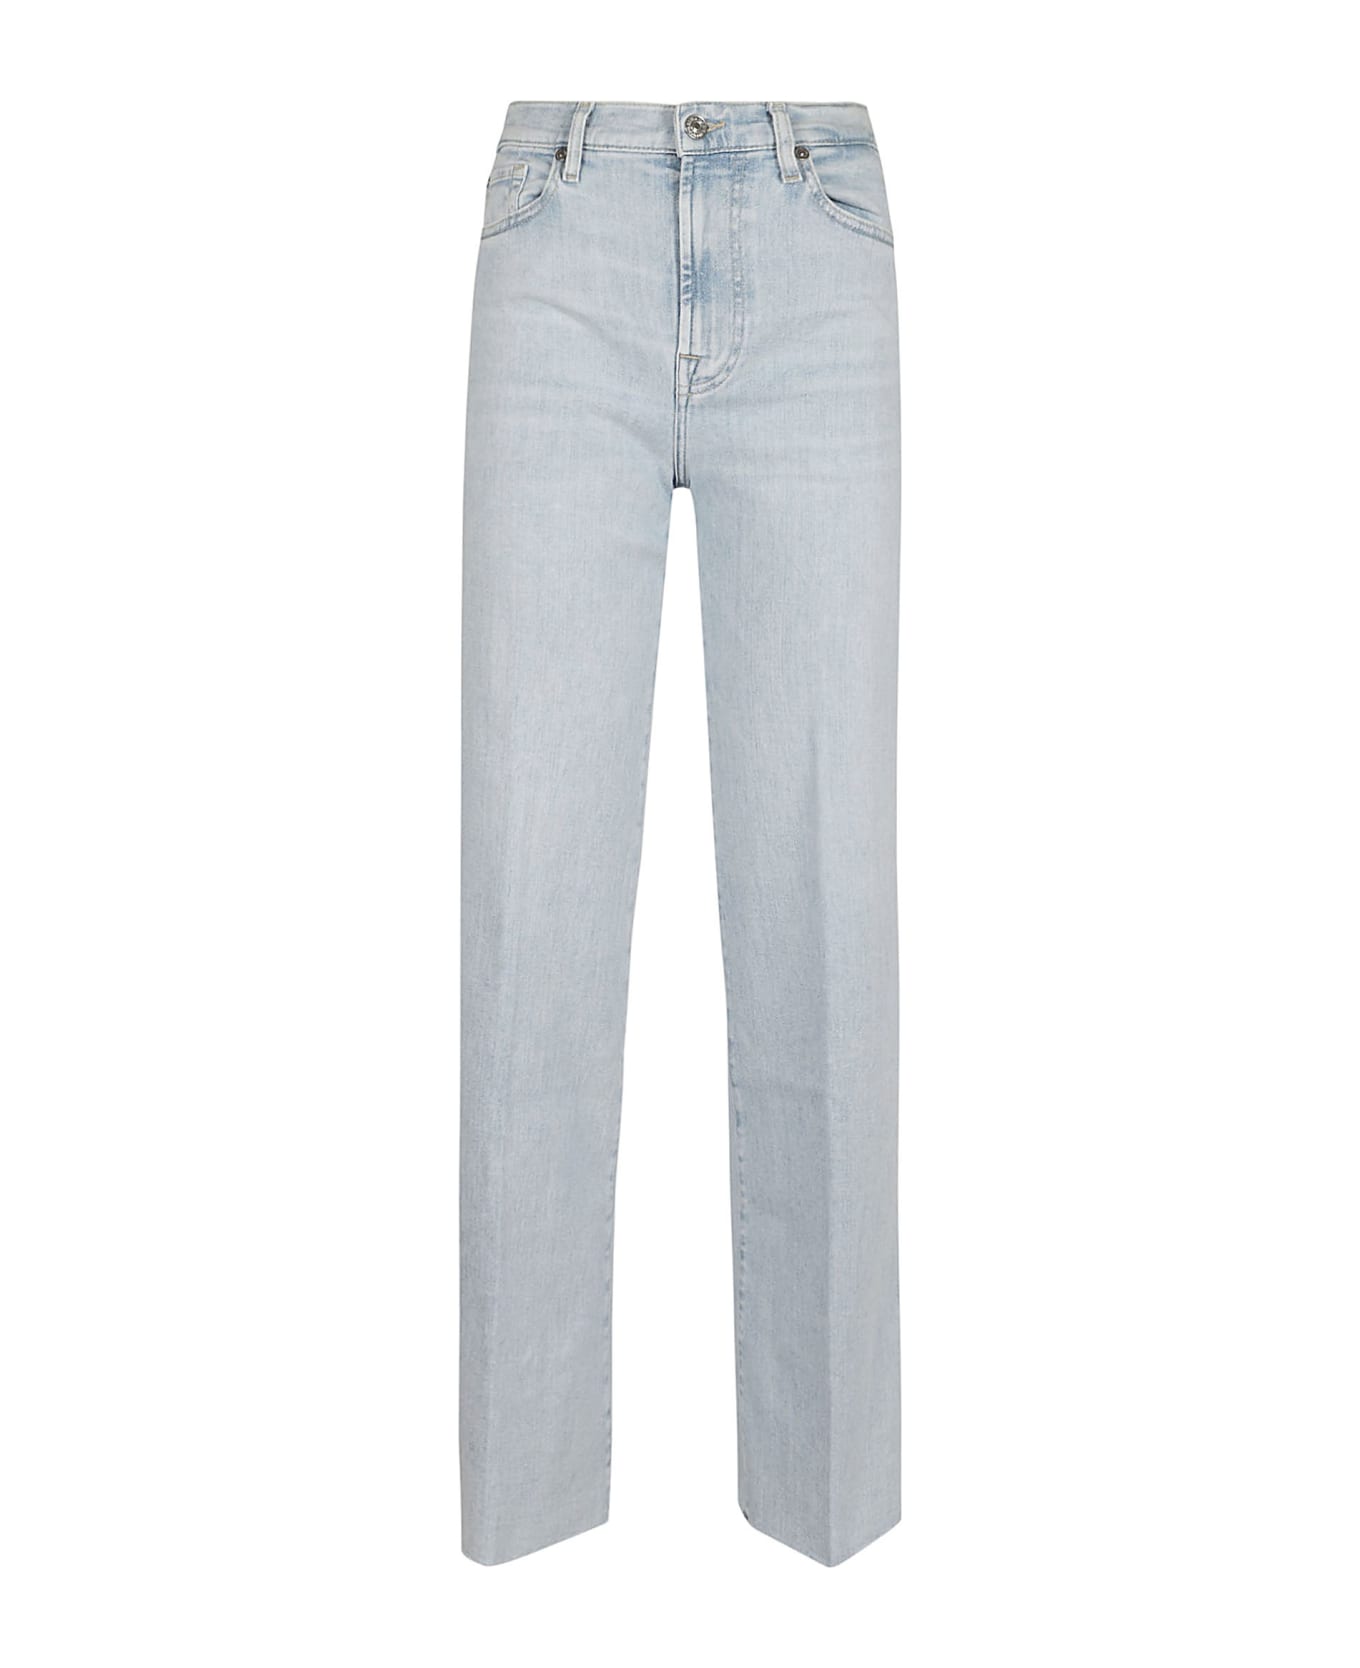 7 For All Mankind Modern Dojo Tailorless Melody - Light Blue